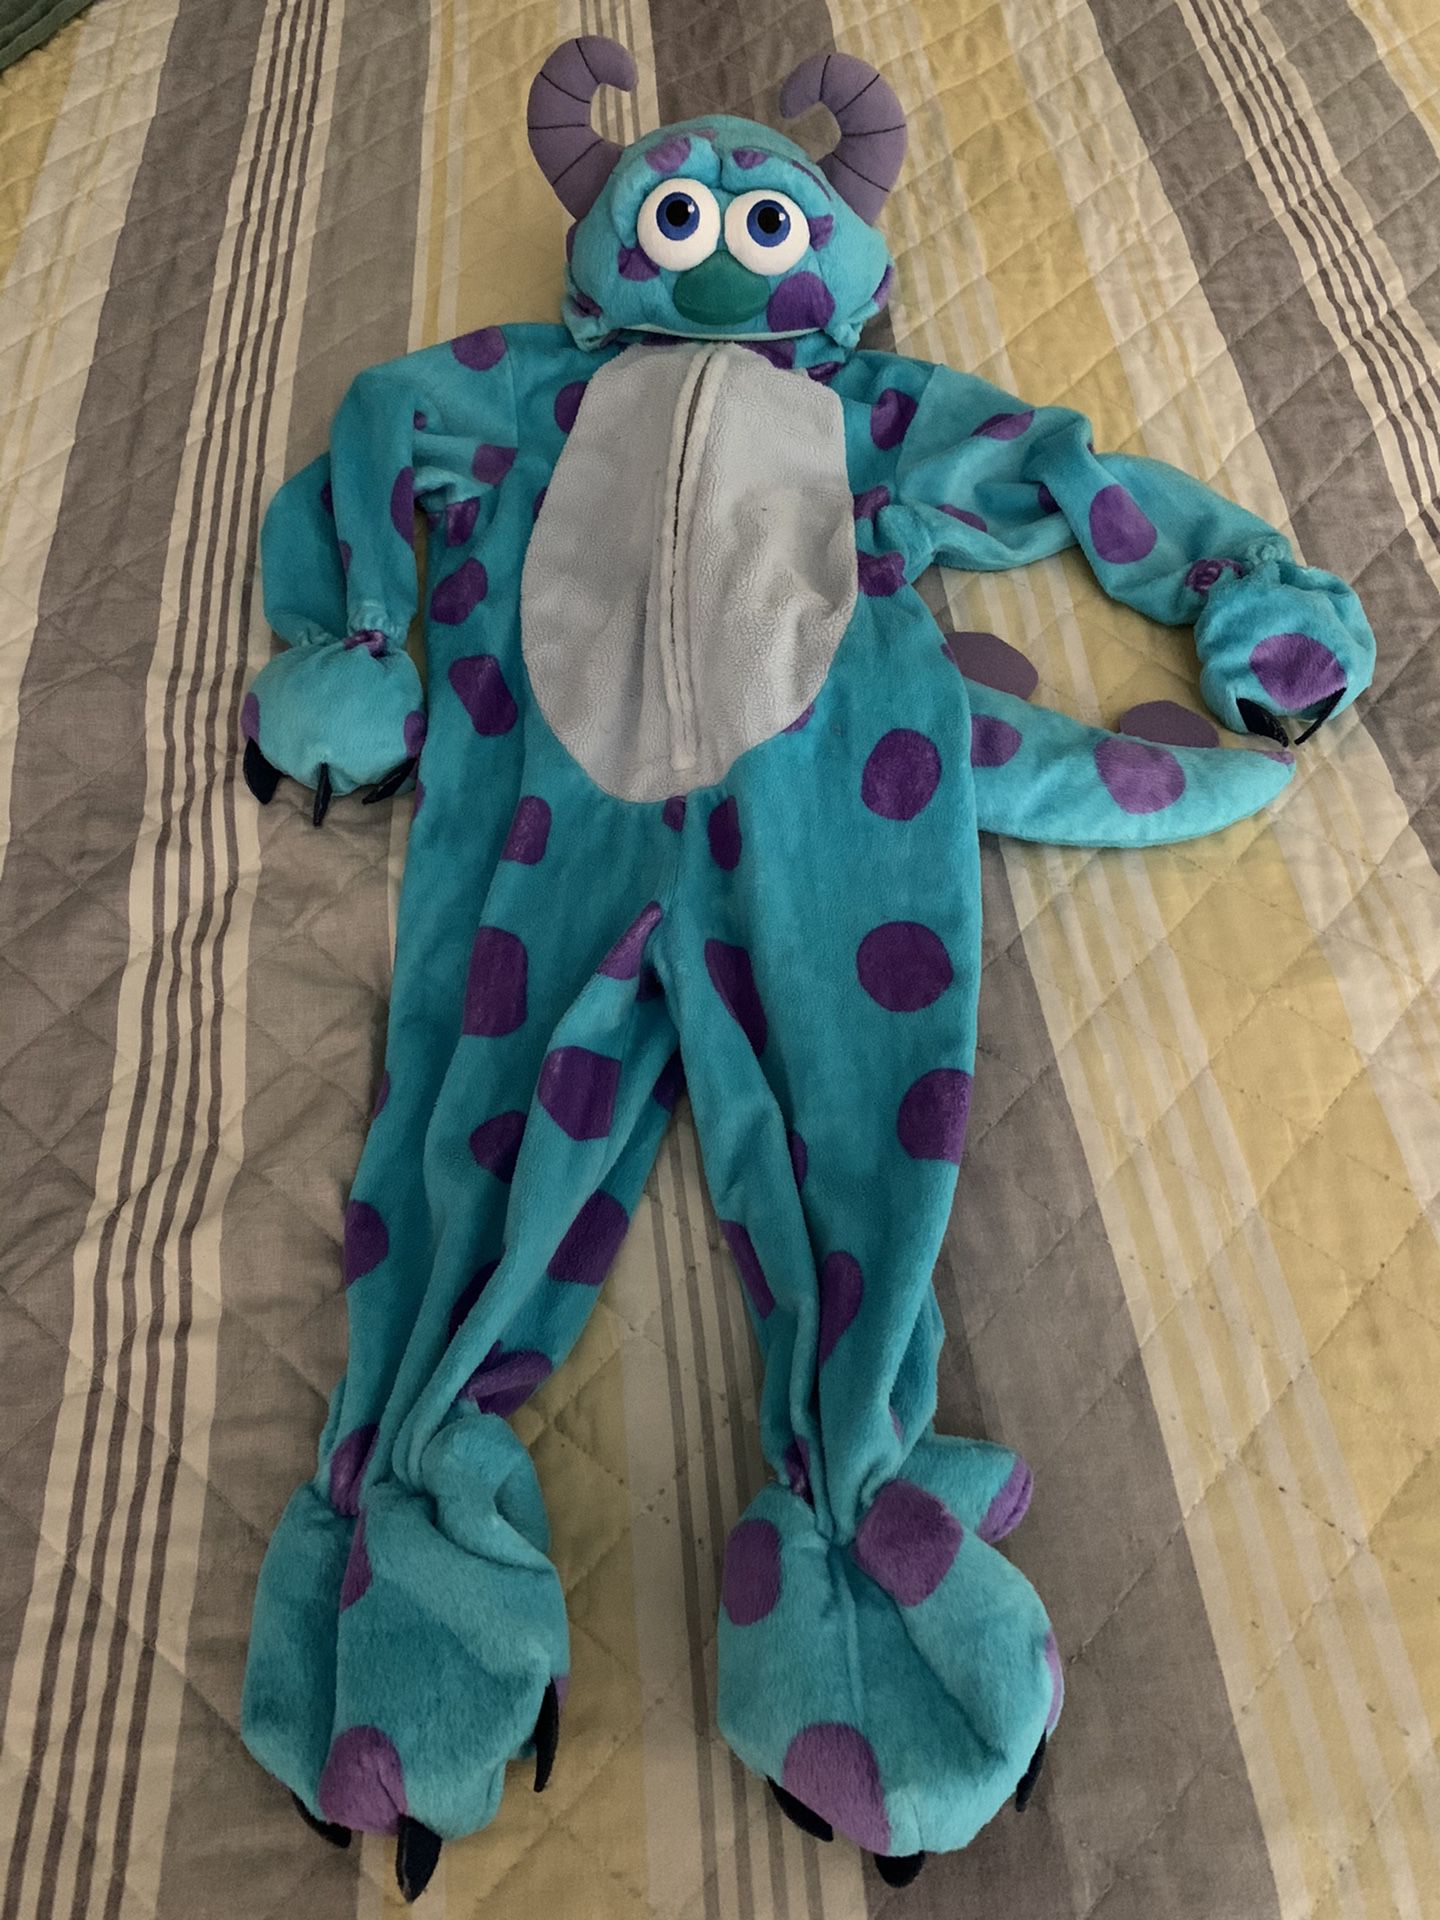 HALLOWEEN COSTUME - Sully from Monsters Inc